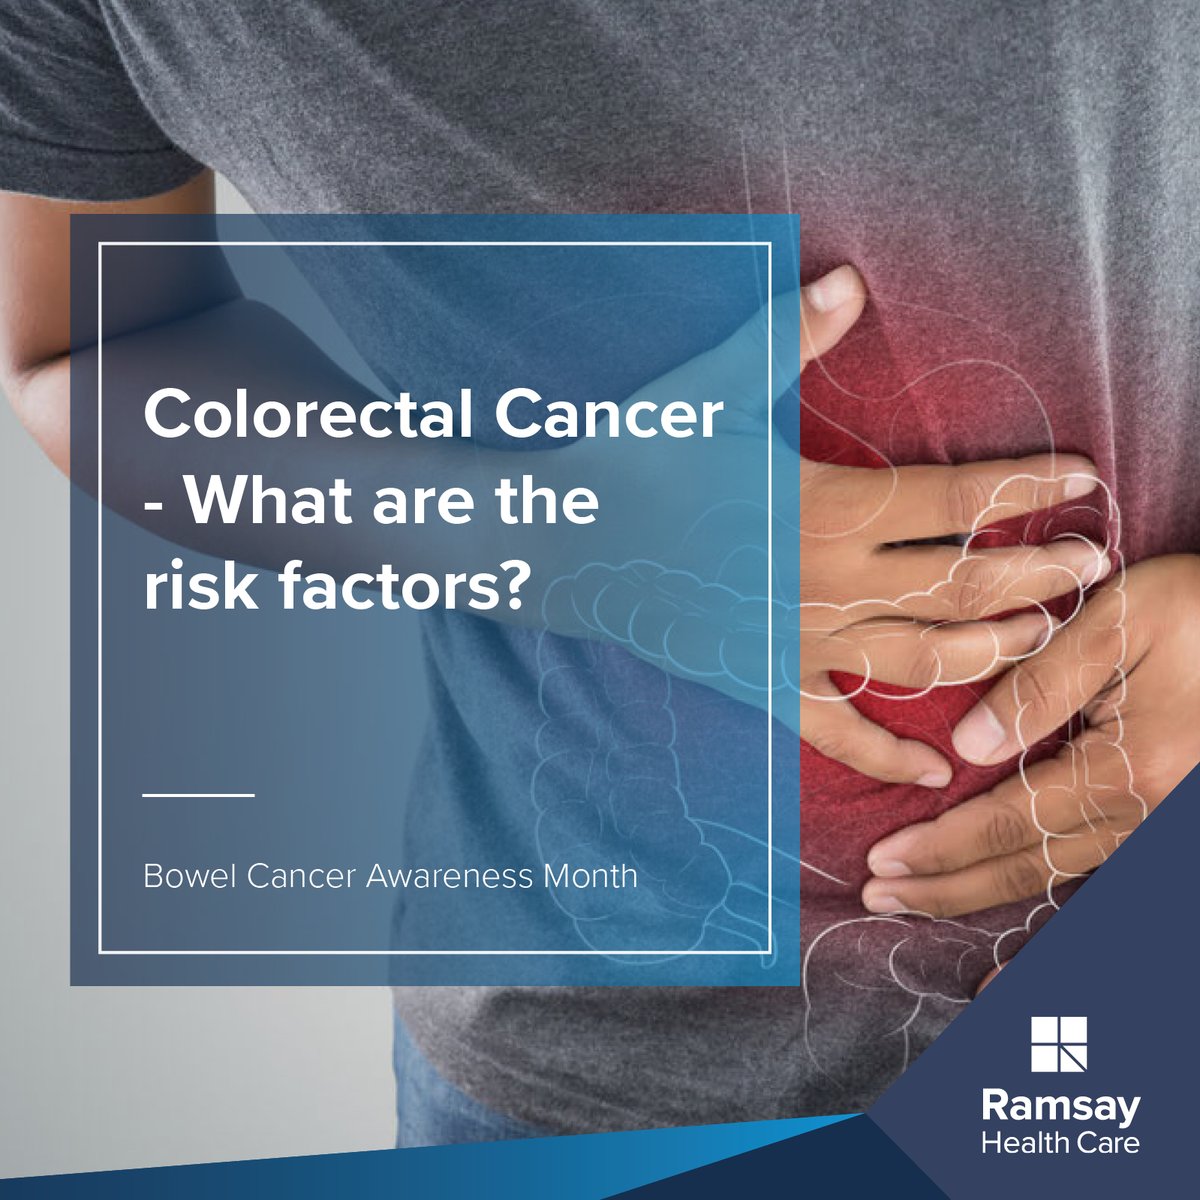 For #BowelCancerAwarenessMonth Consultant General Surgeon, Mr Doulias tells us about risk factors for colorectal cancer. Understanding these can empower you to take proactive steps towards early detection and prevention. Read the full blog here: ow.ly/awxB50R8ewS